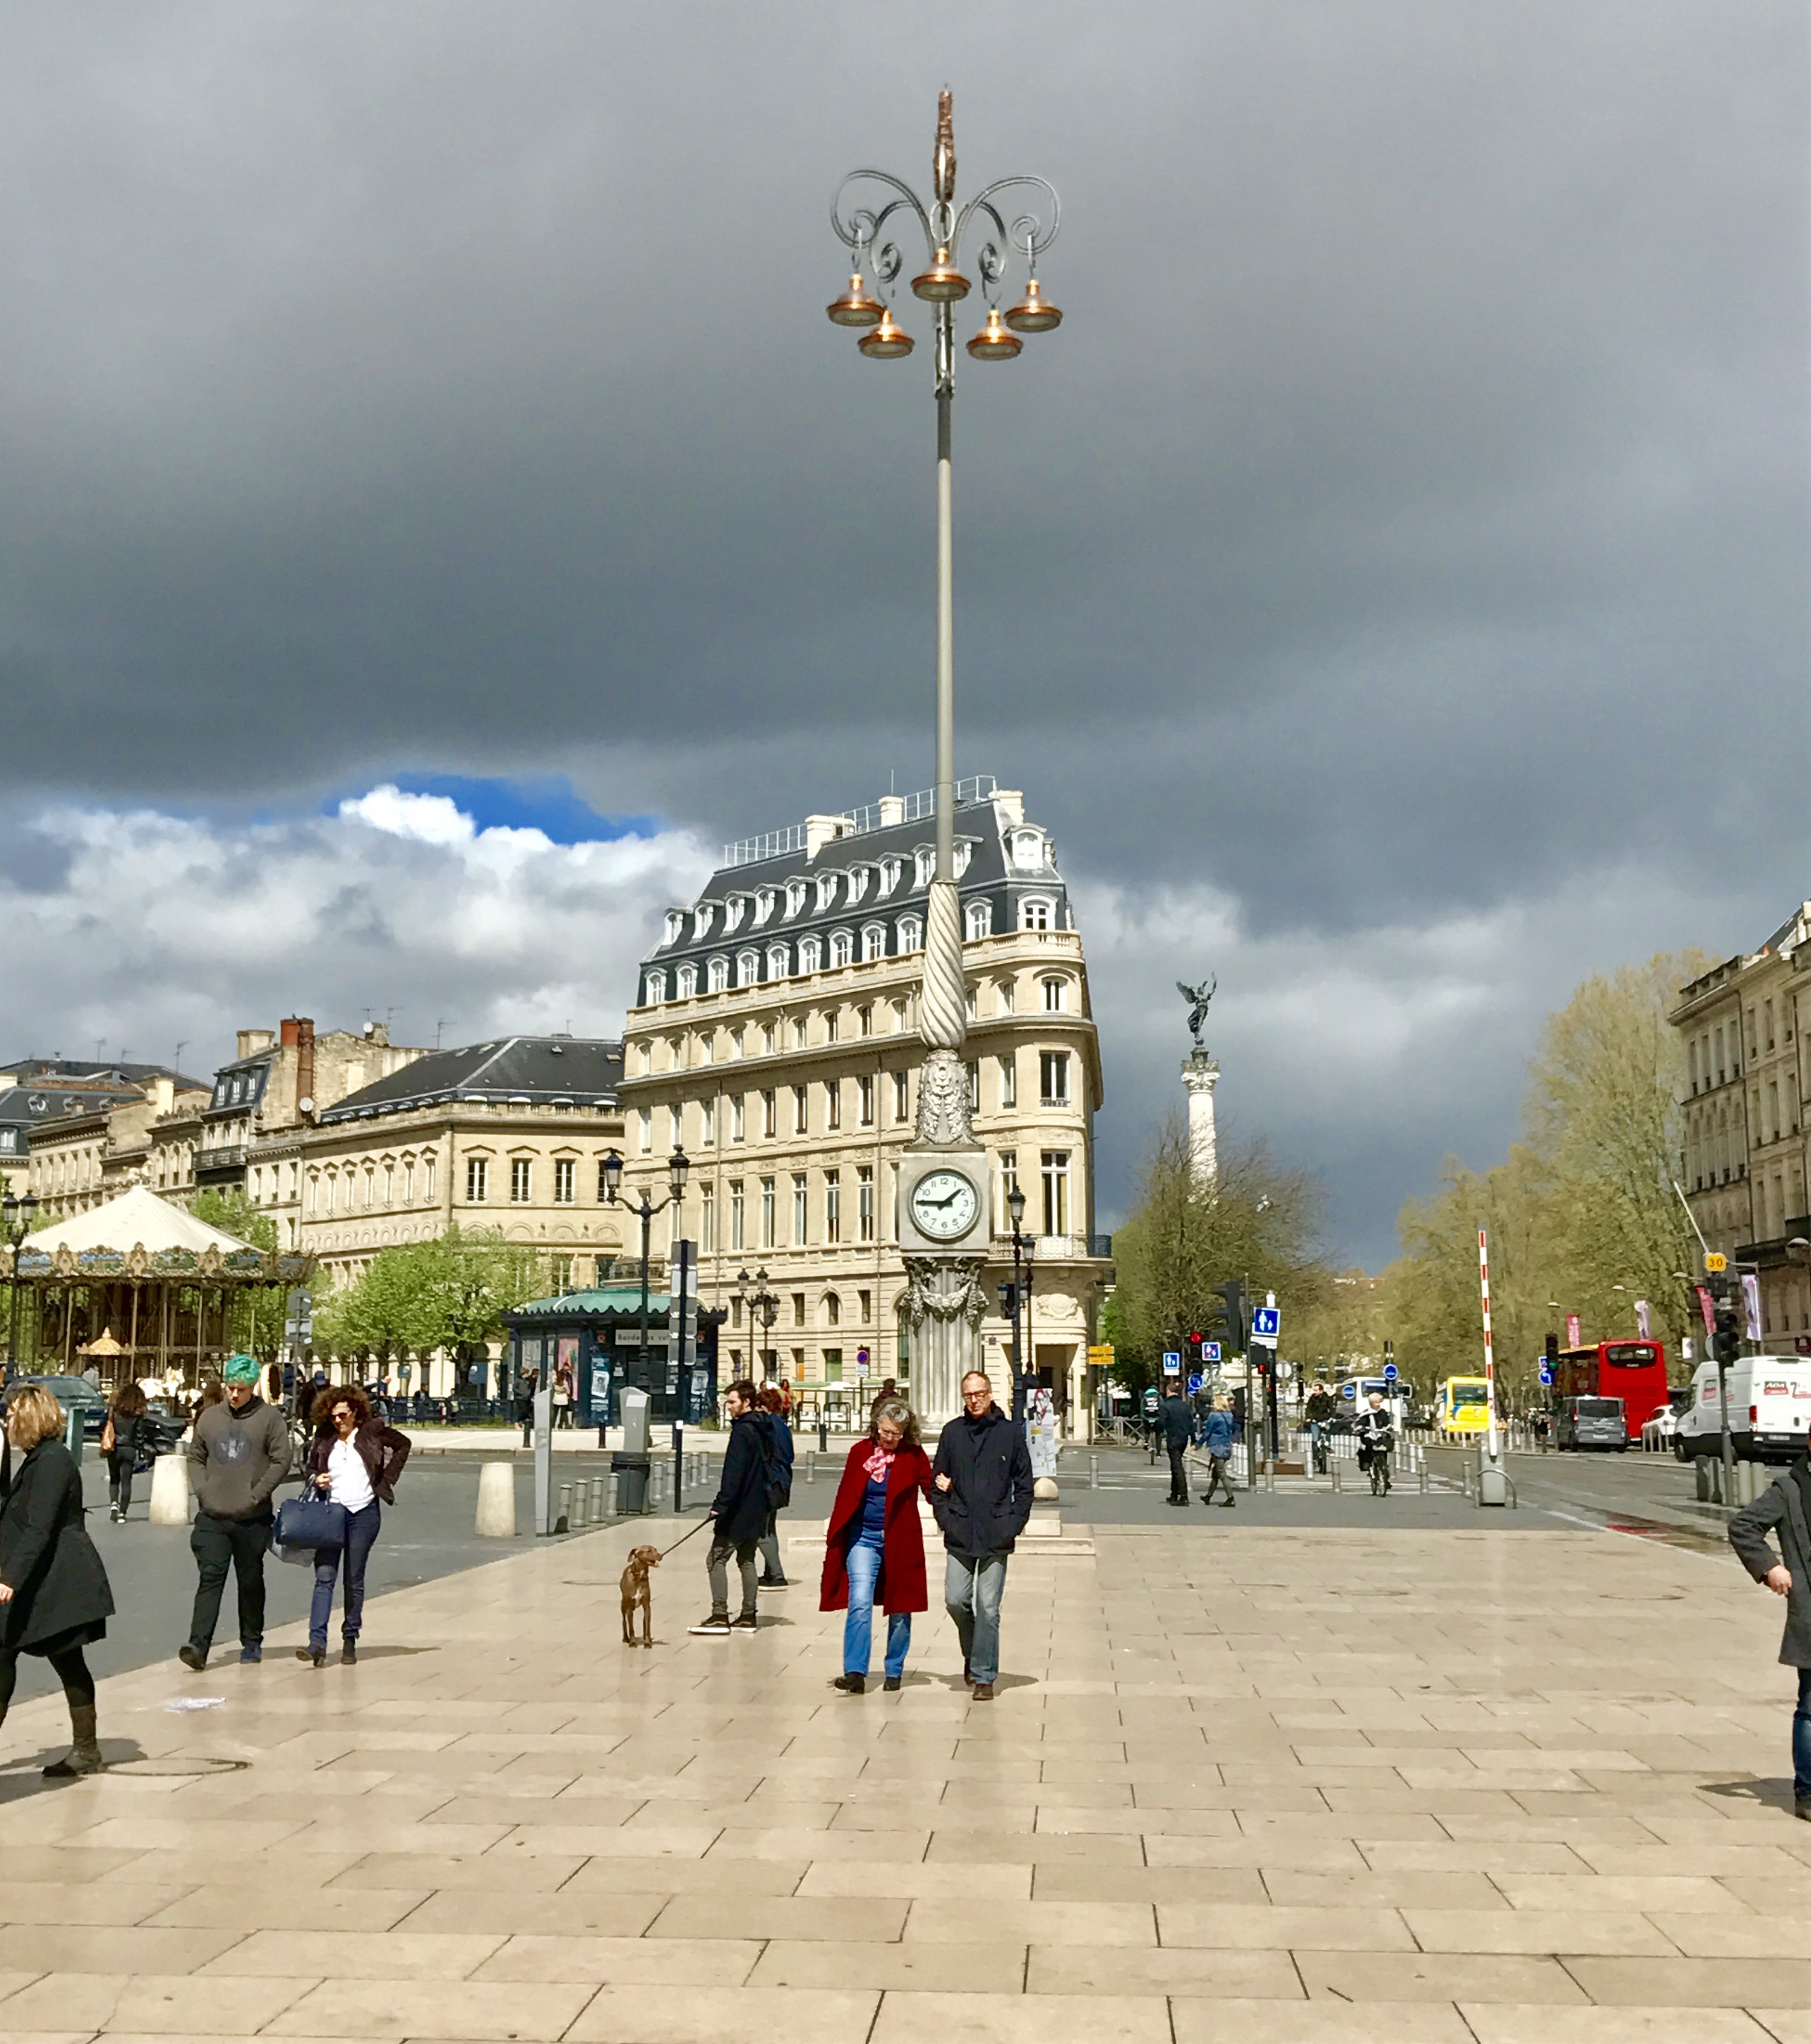 Discovering The Wine And Culture of Bordeaux Through The Millésima Blog Awards